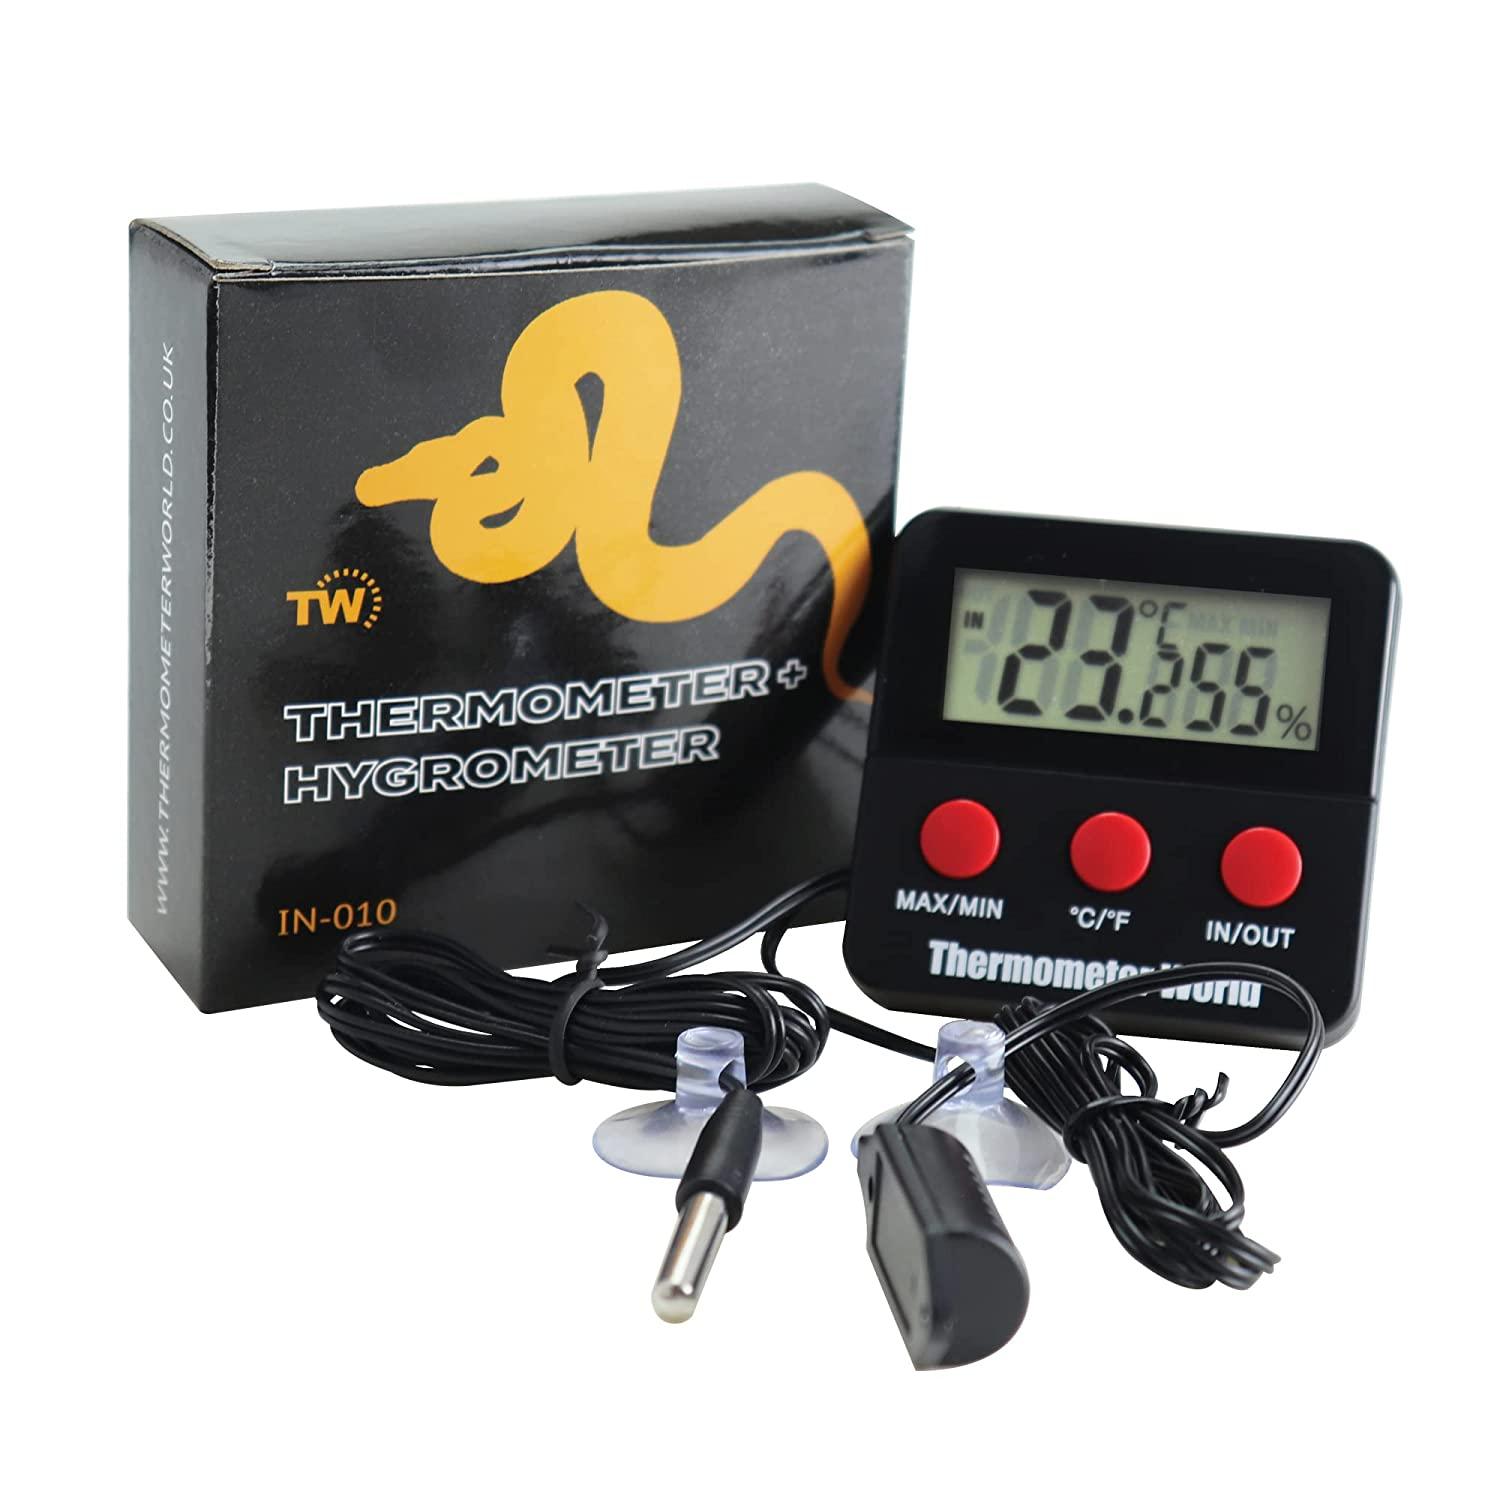 Reptile Terrarium Thermometers and Hygrometers